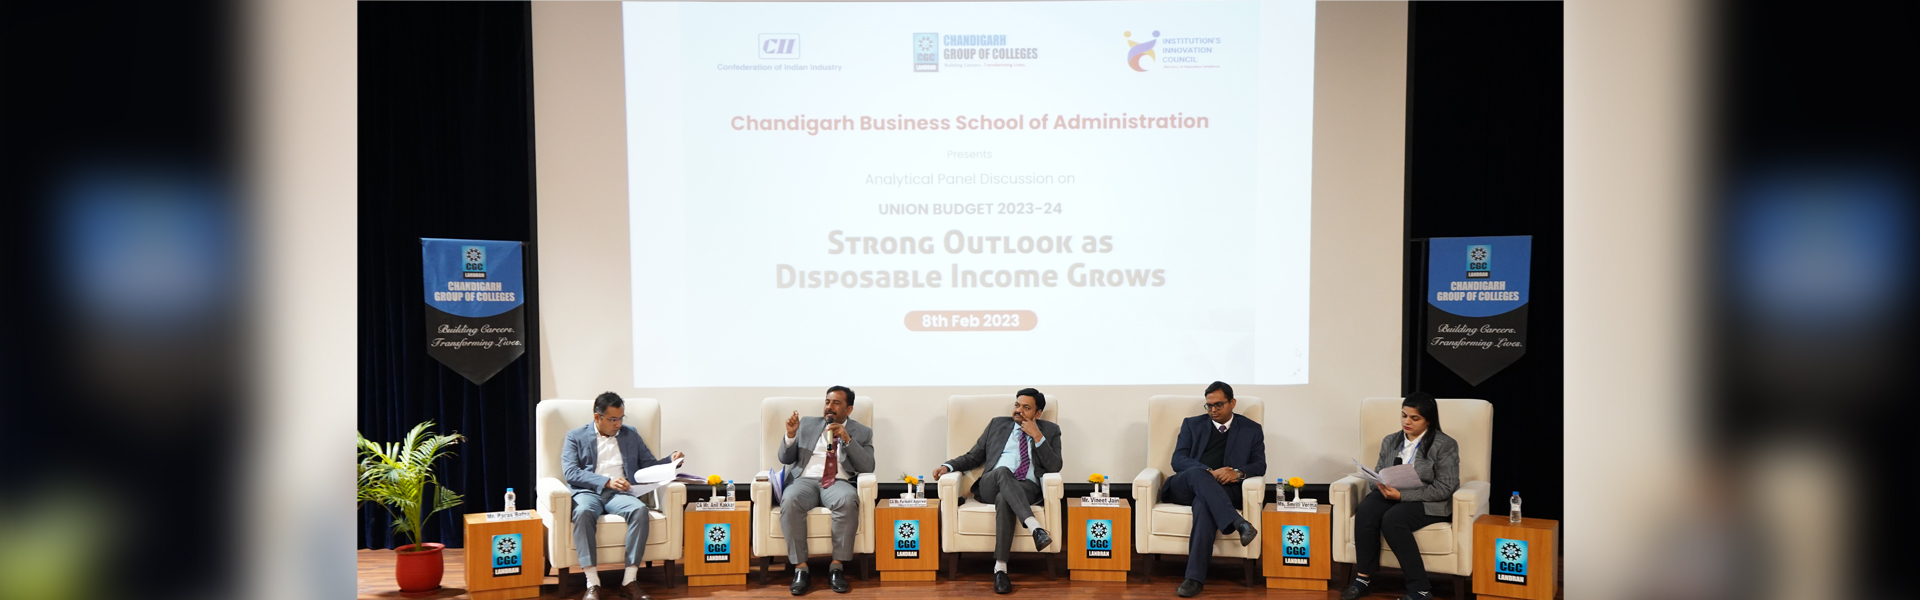 Panel Discussion on Union Budget 2023-24: Strong Outlook as Disposable Income Grows 